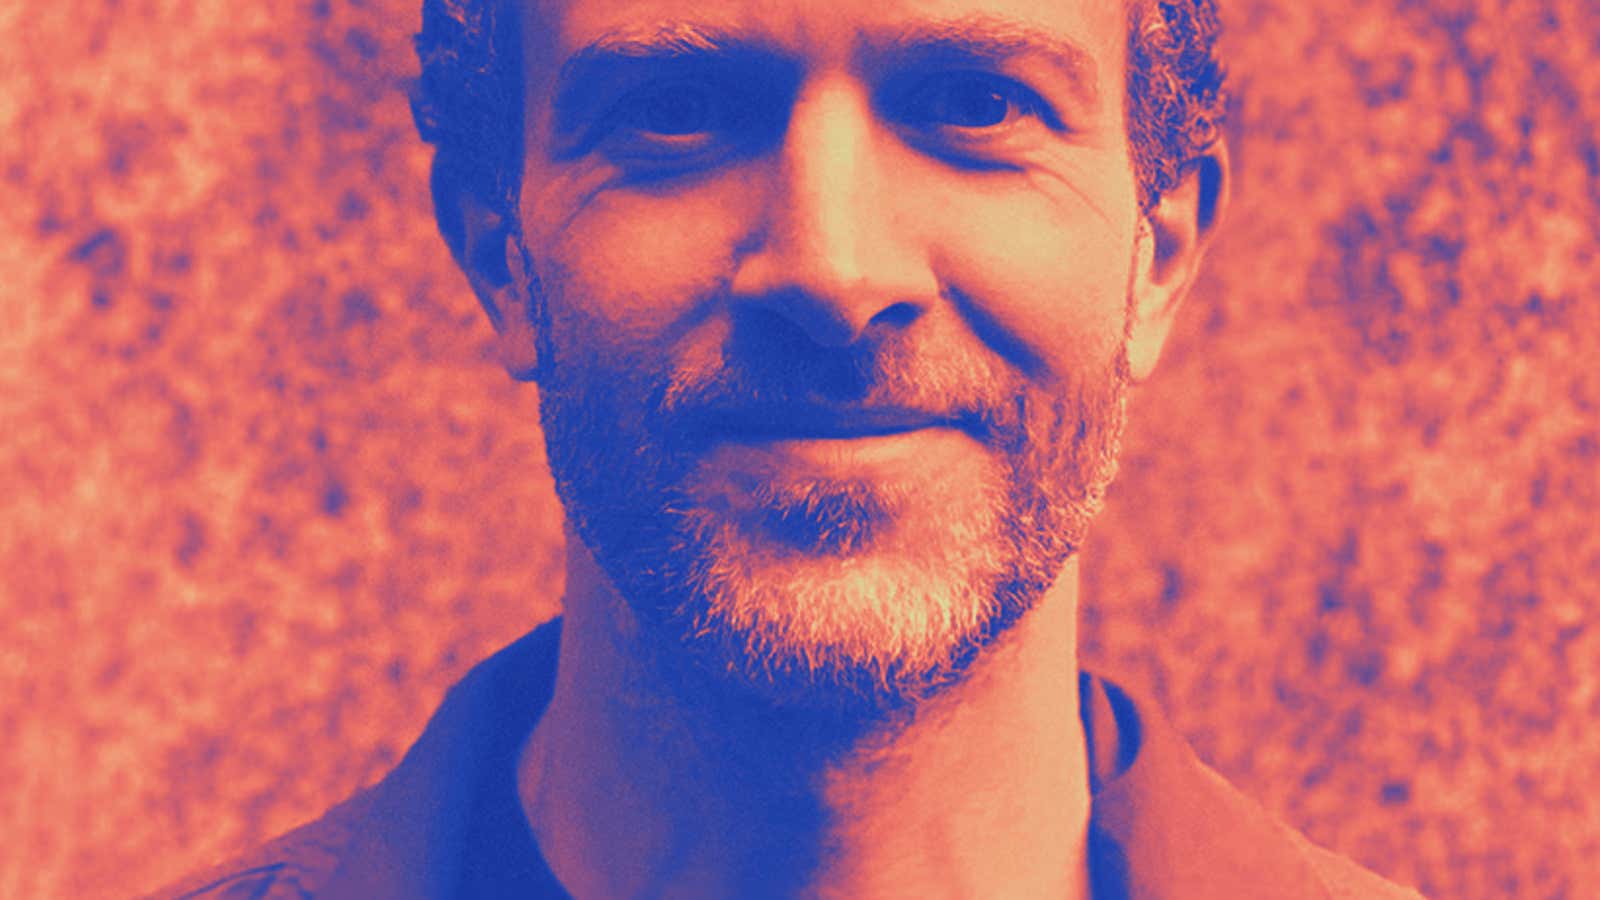 Jason Fried on what will change, and what won’t, because of Covid